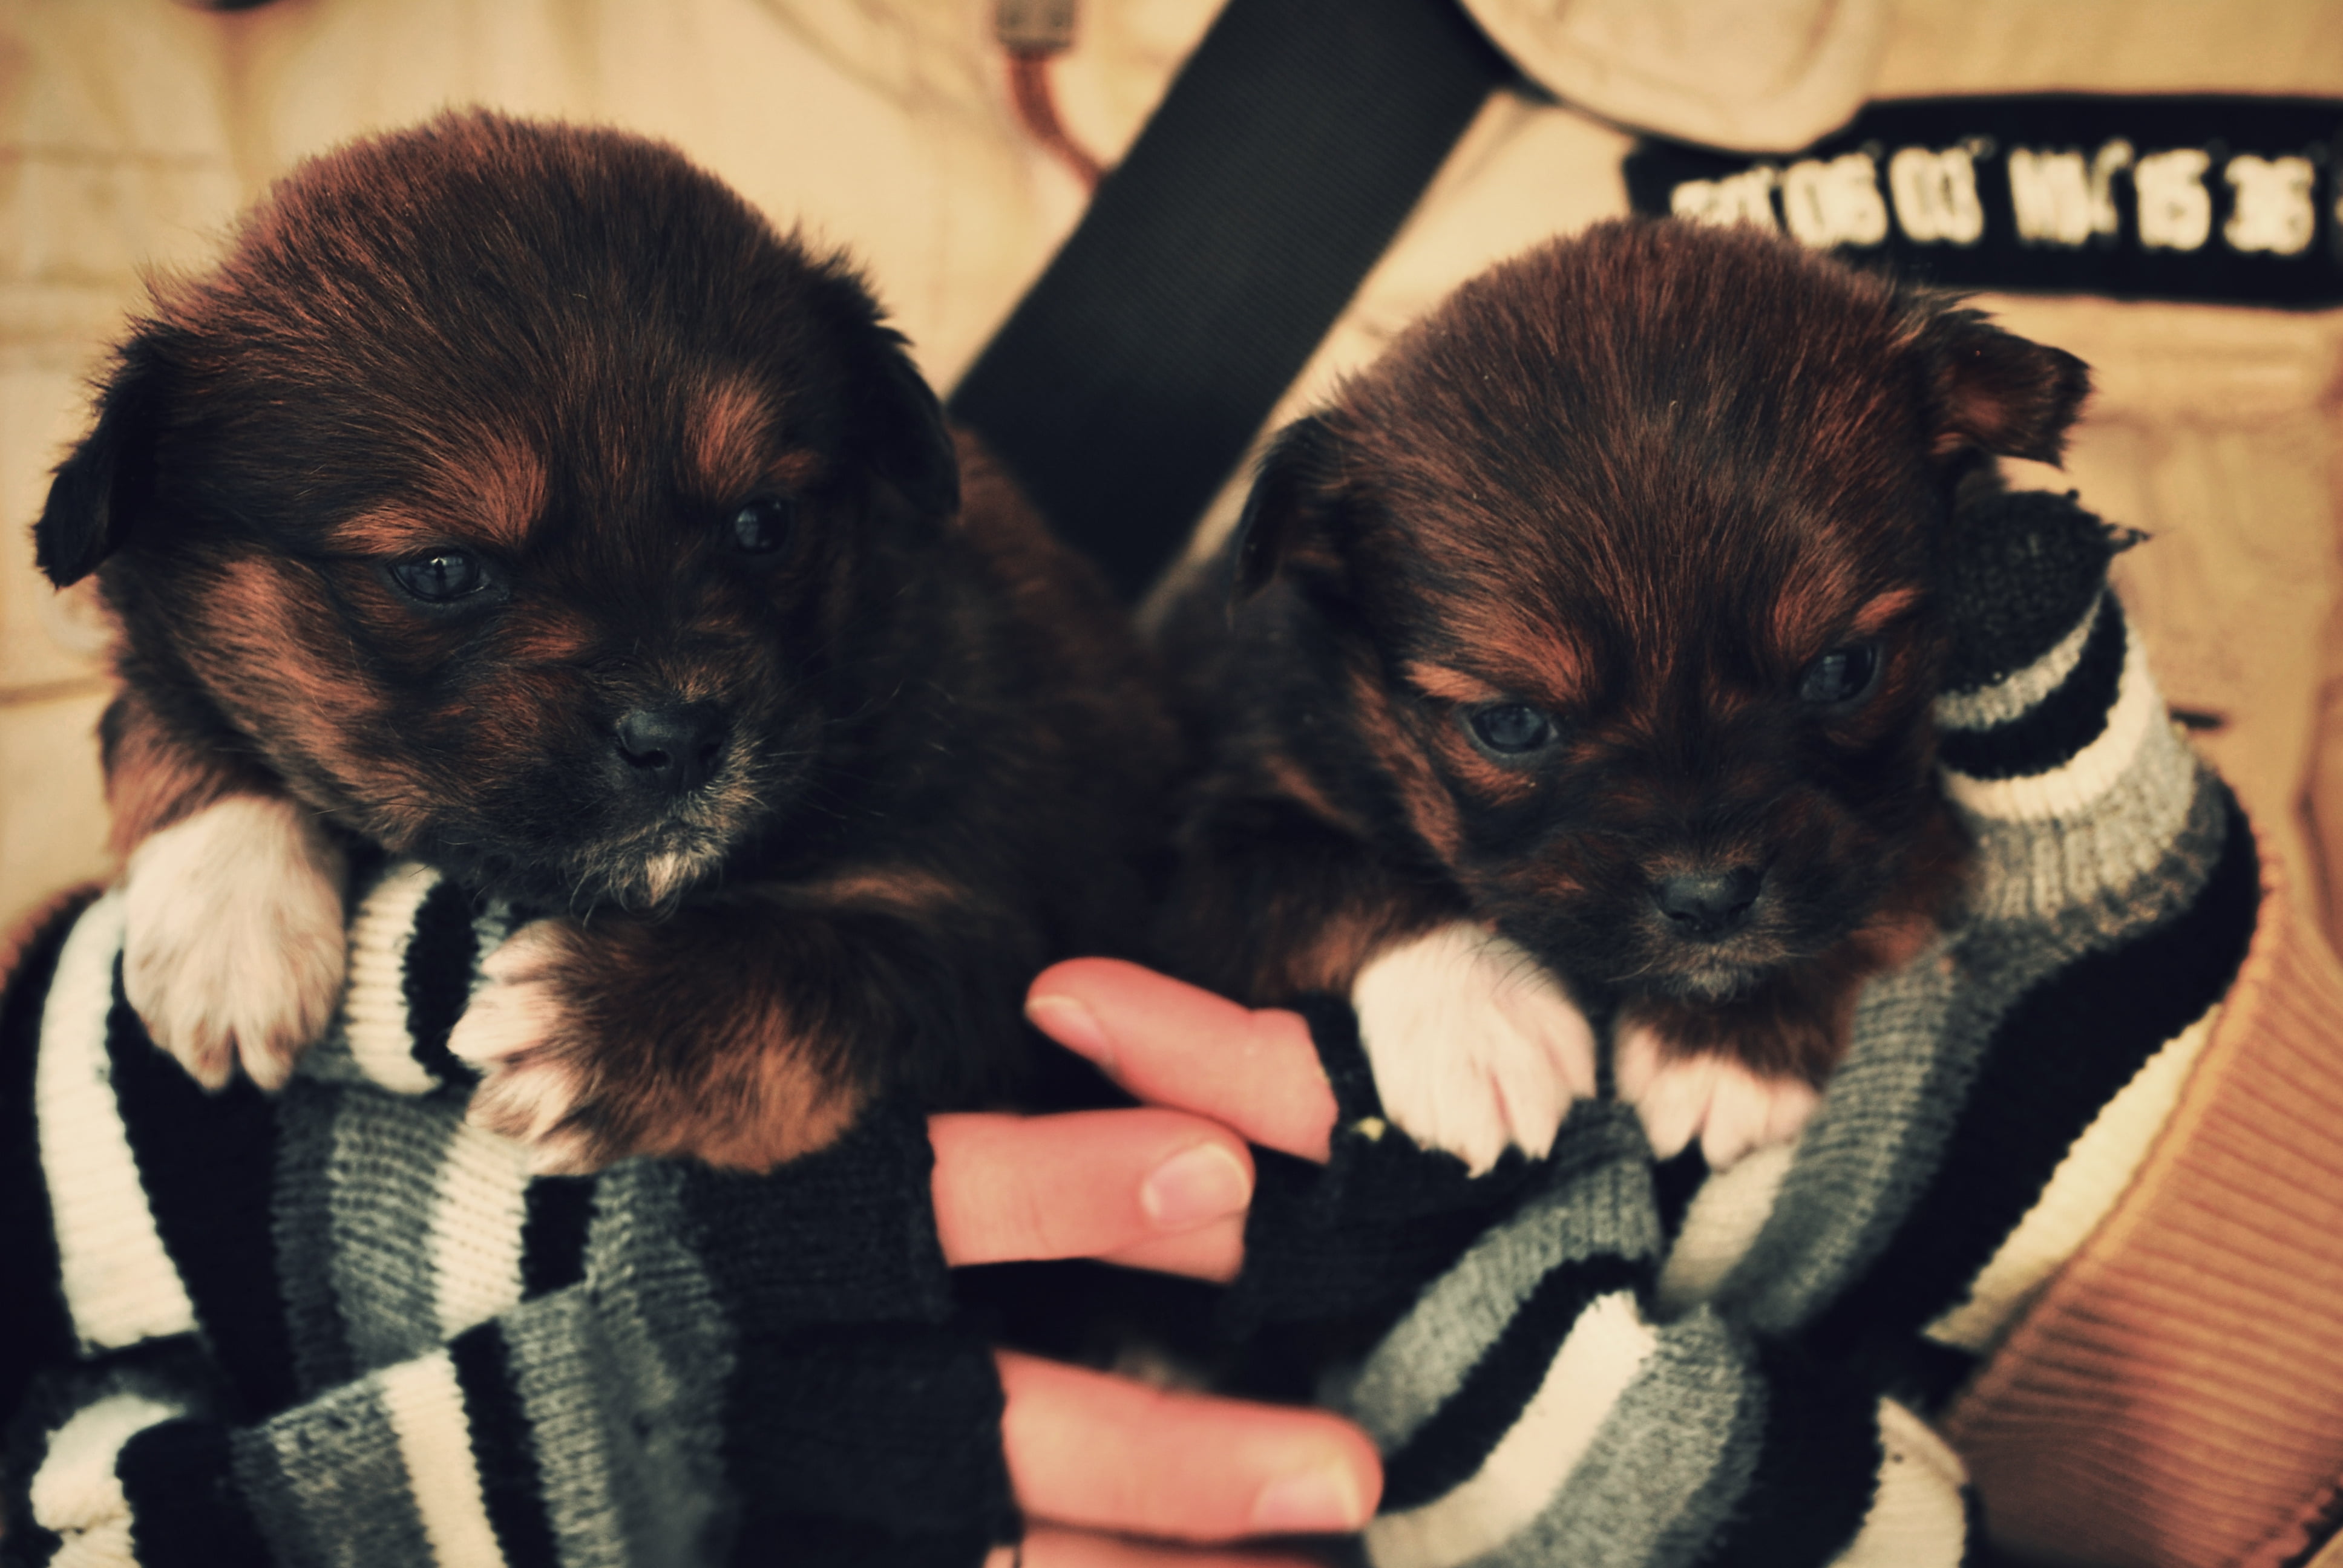 person holding two short-coated tan-and-black puppies